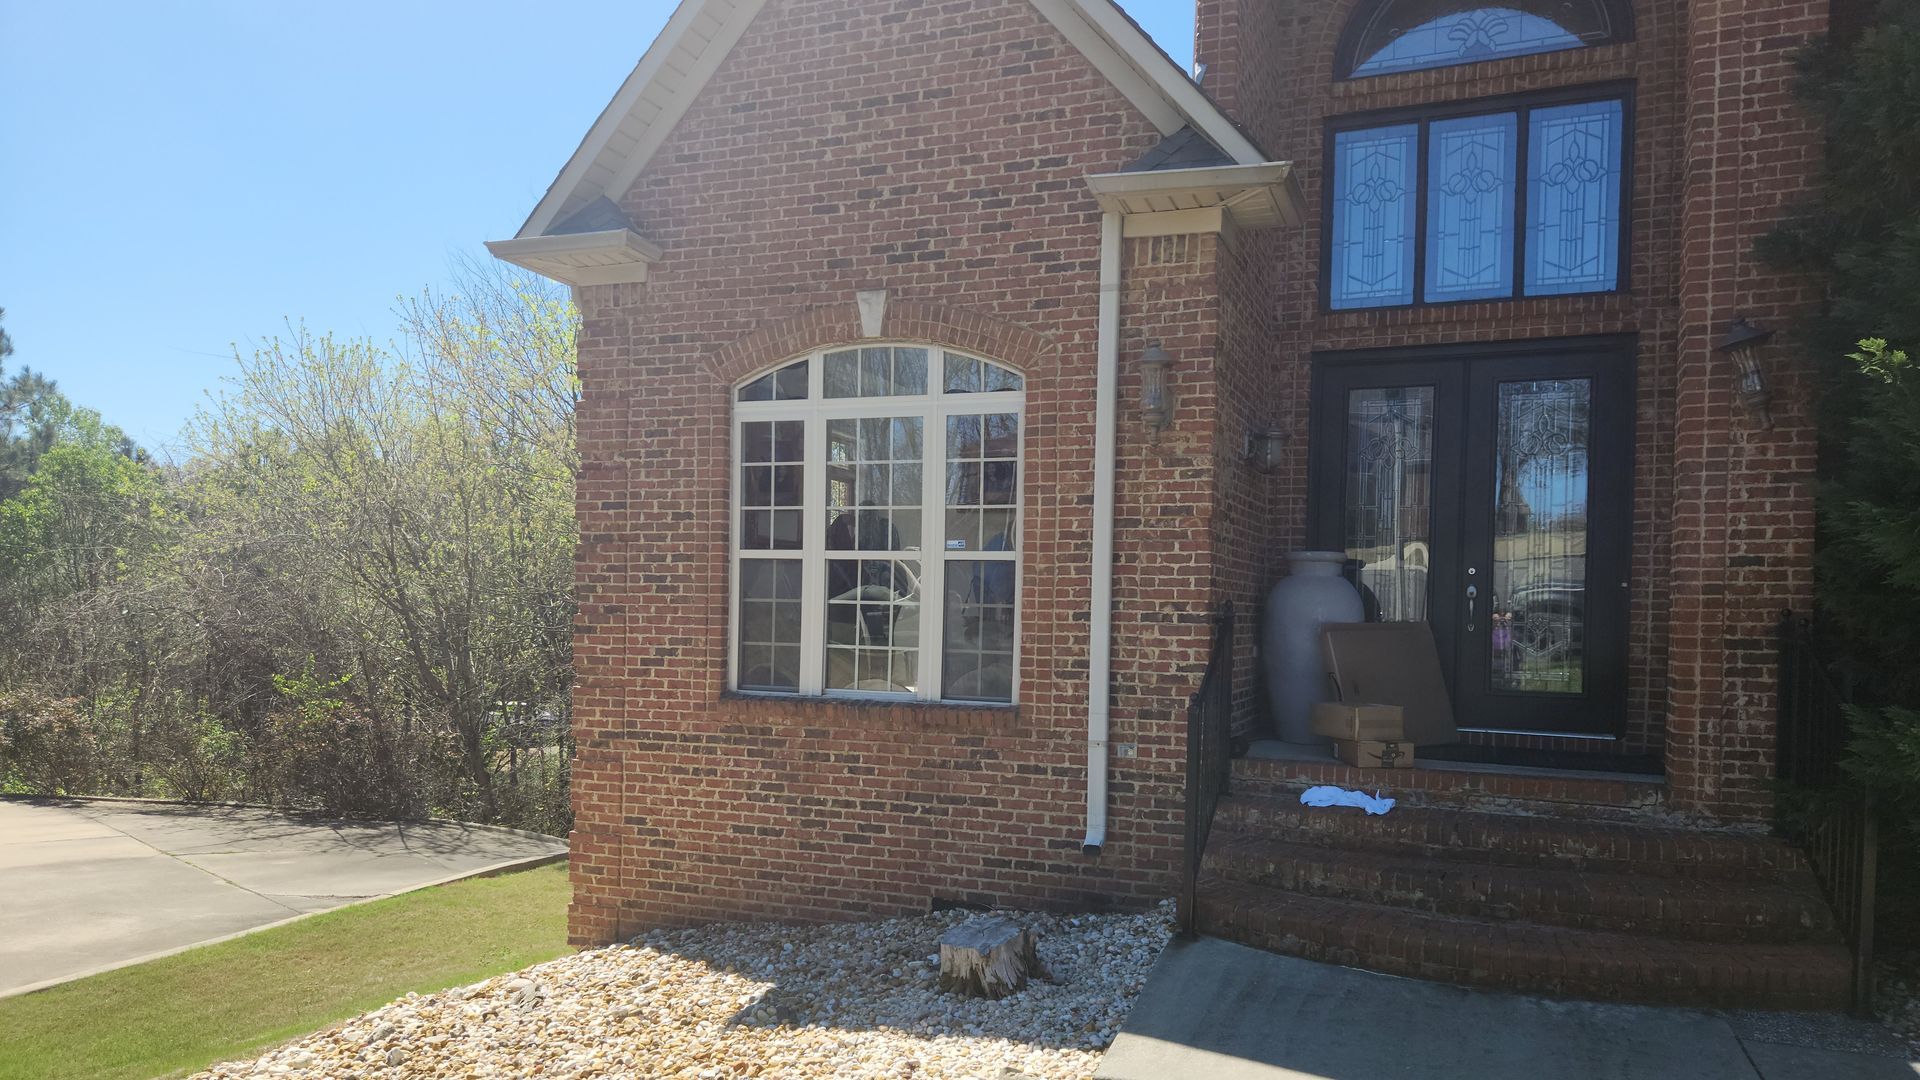 home window tinting in Birmingham AL - Now the room's purpose has been supported with the right privacy. With over 99% UV-Radiation blocked from entering the home windows in Birmingham AL